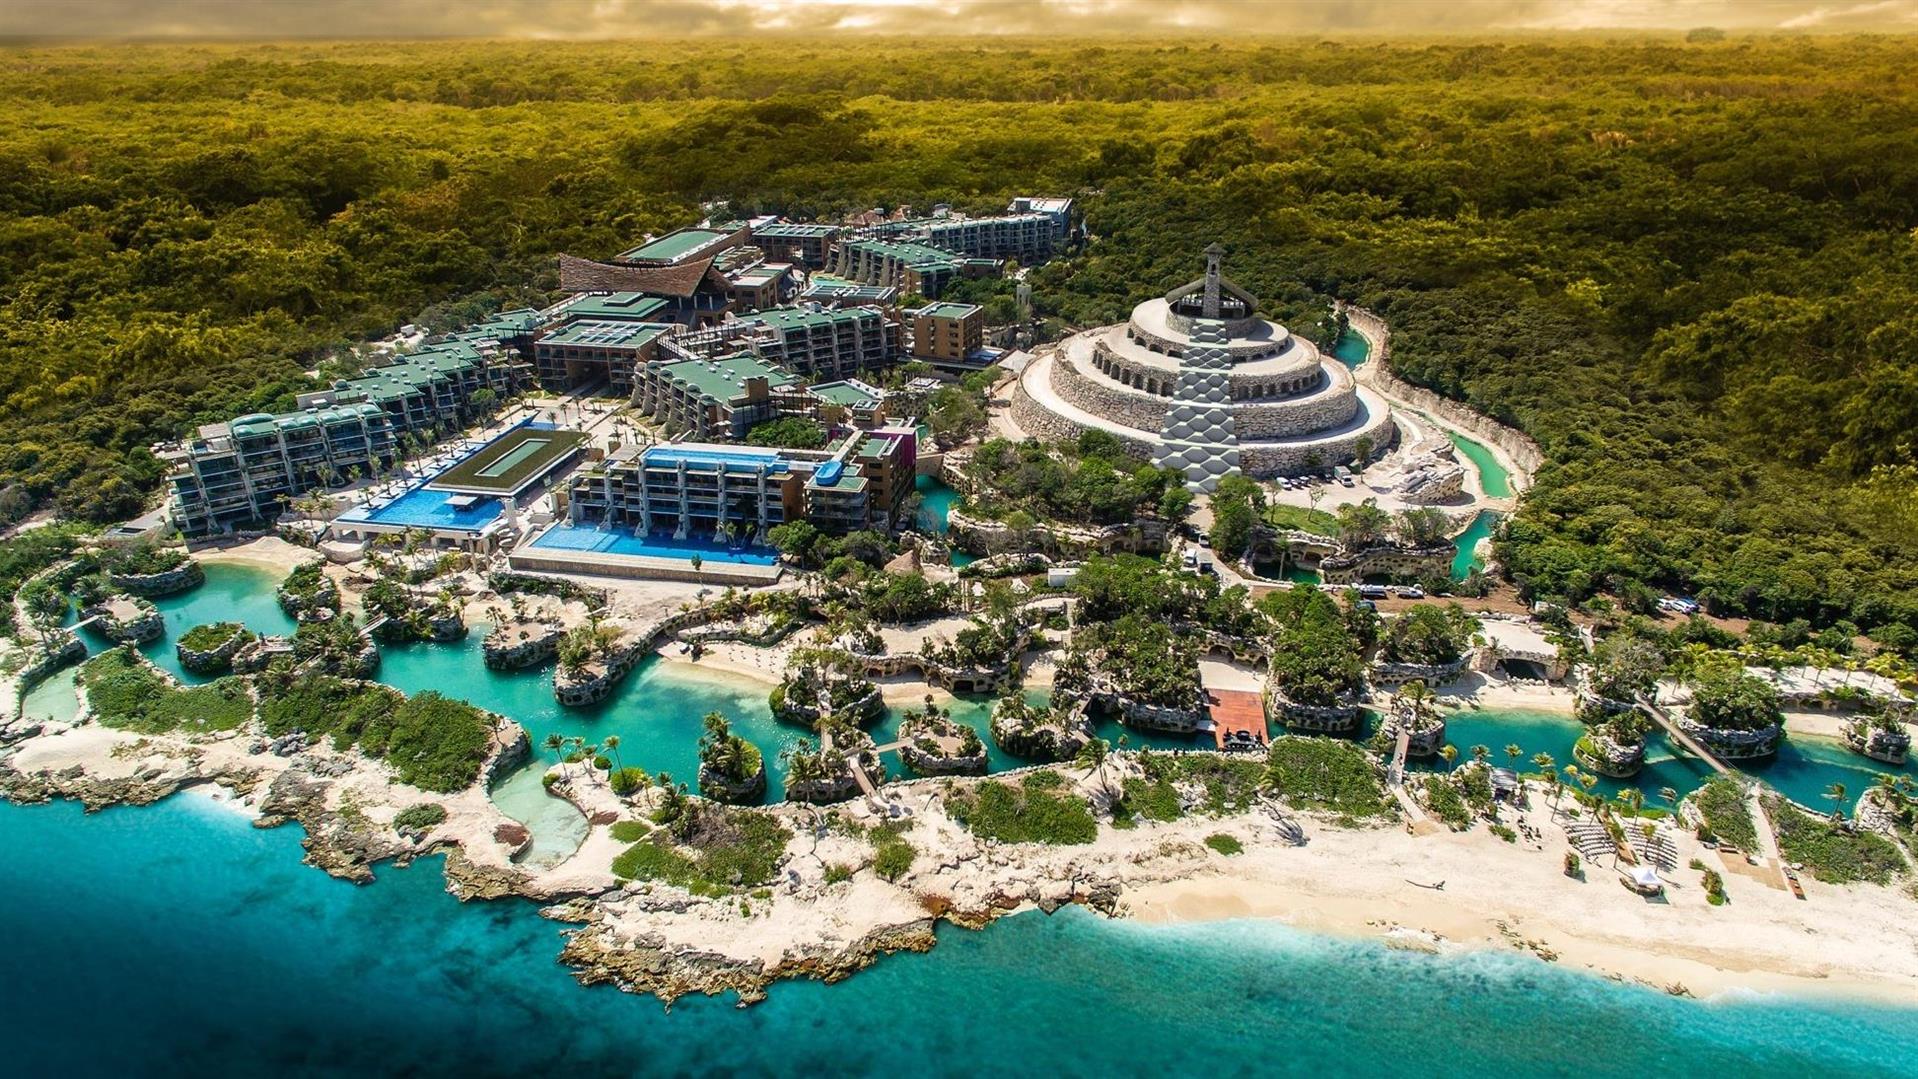 Hotel Xcaret Mexico Offers Rich Natural Experiences